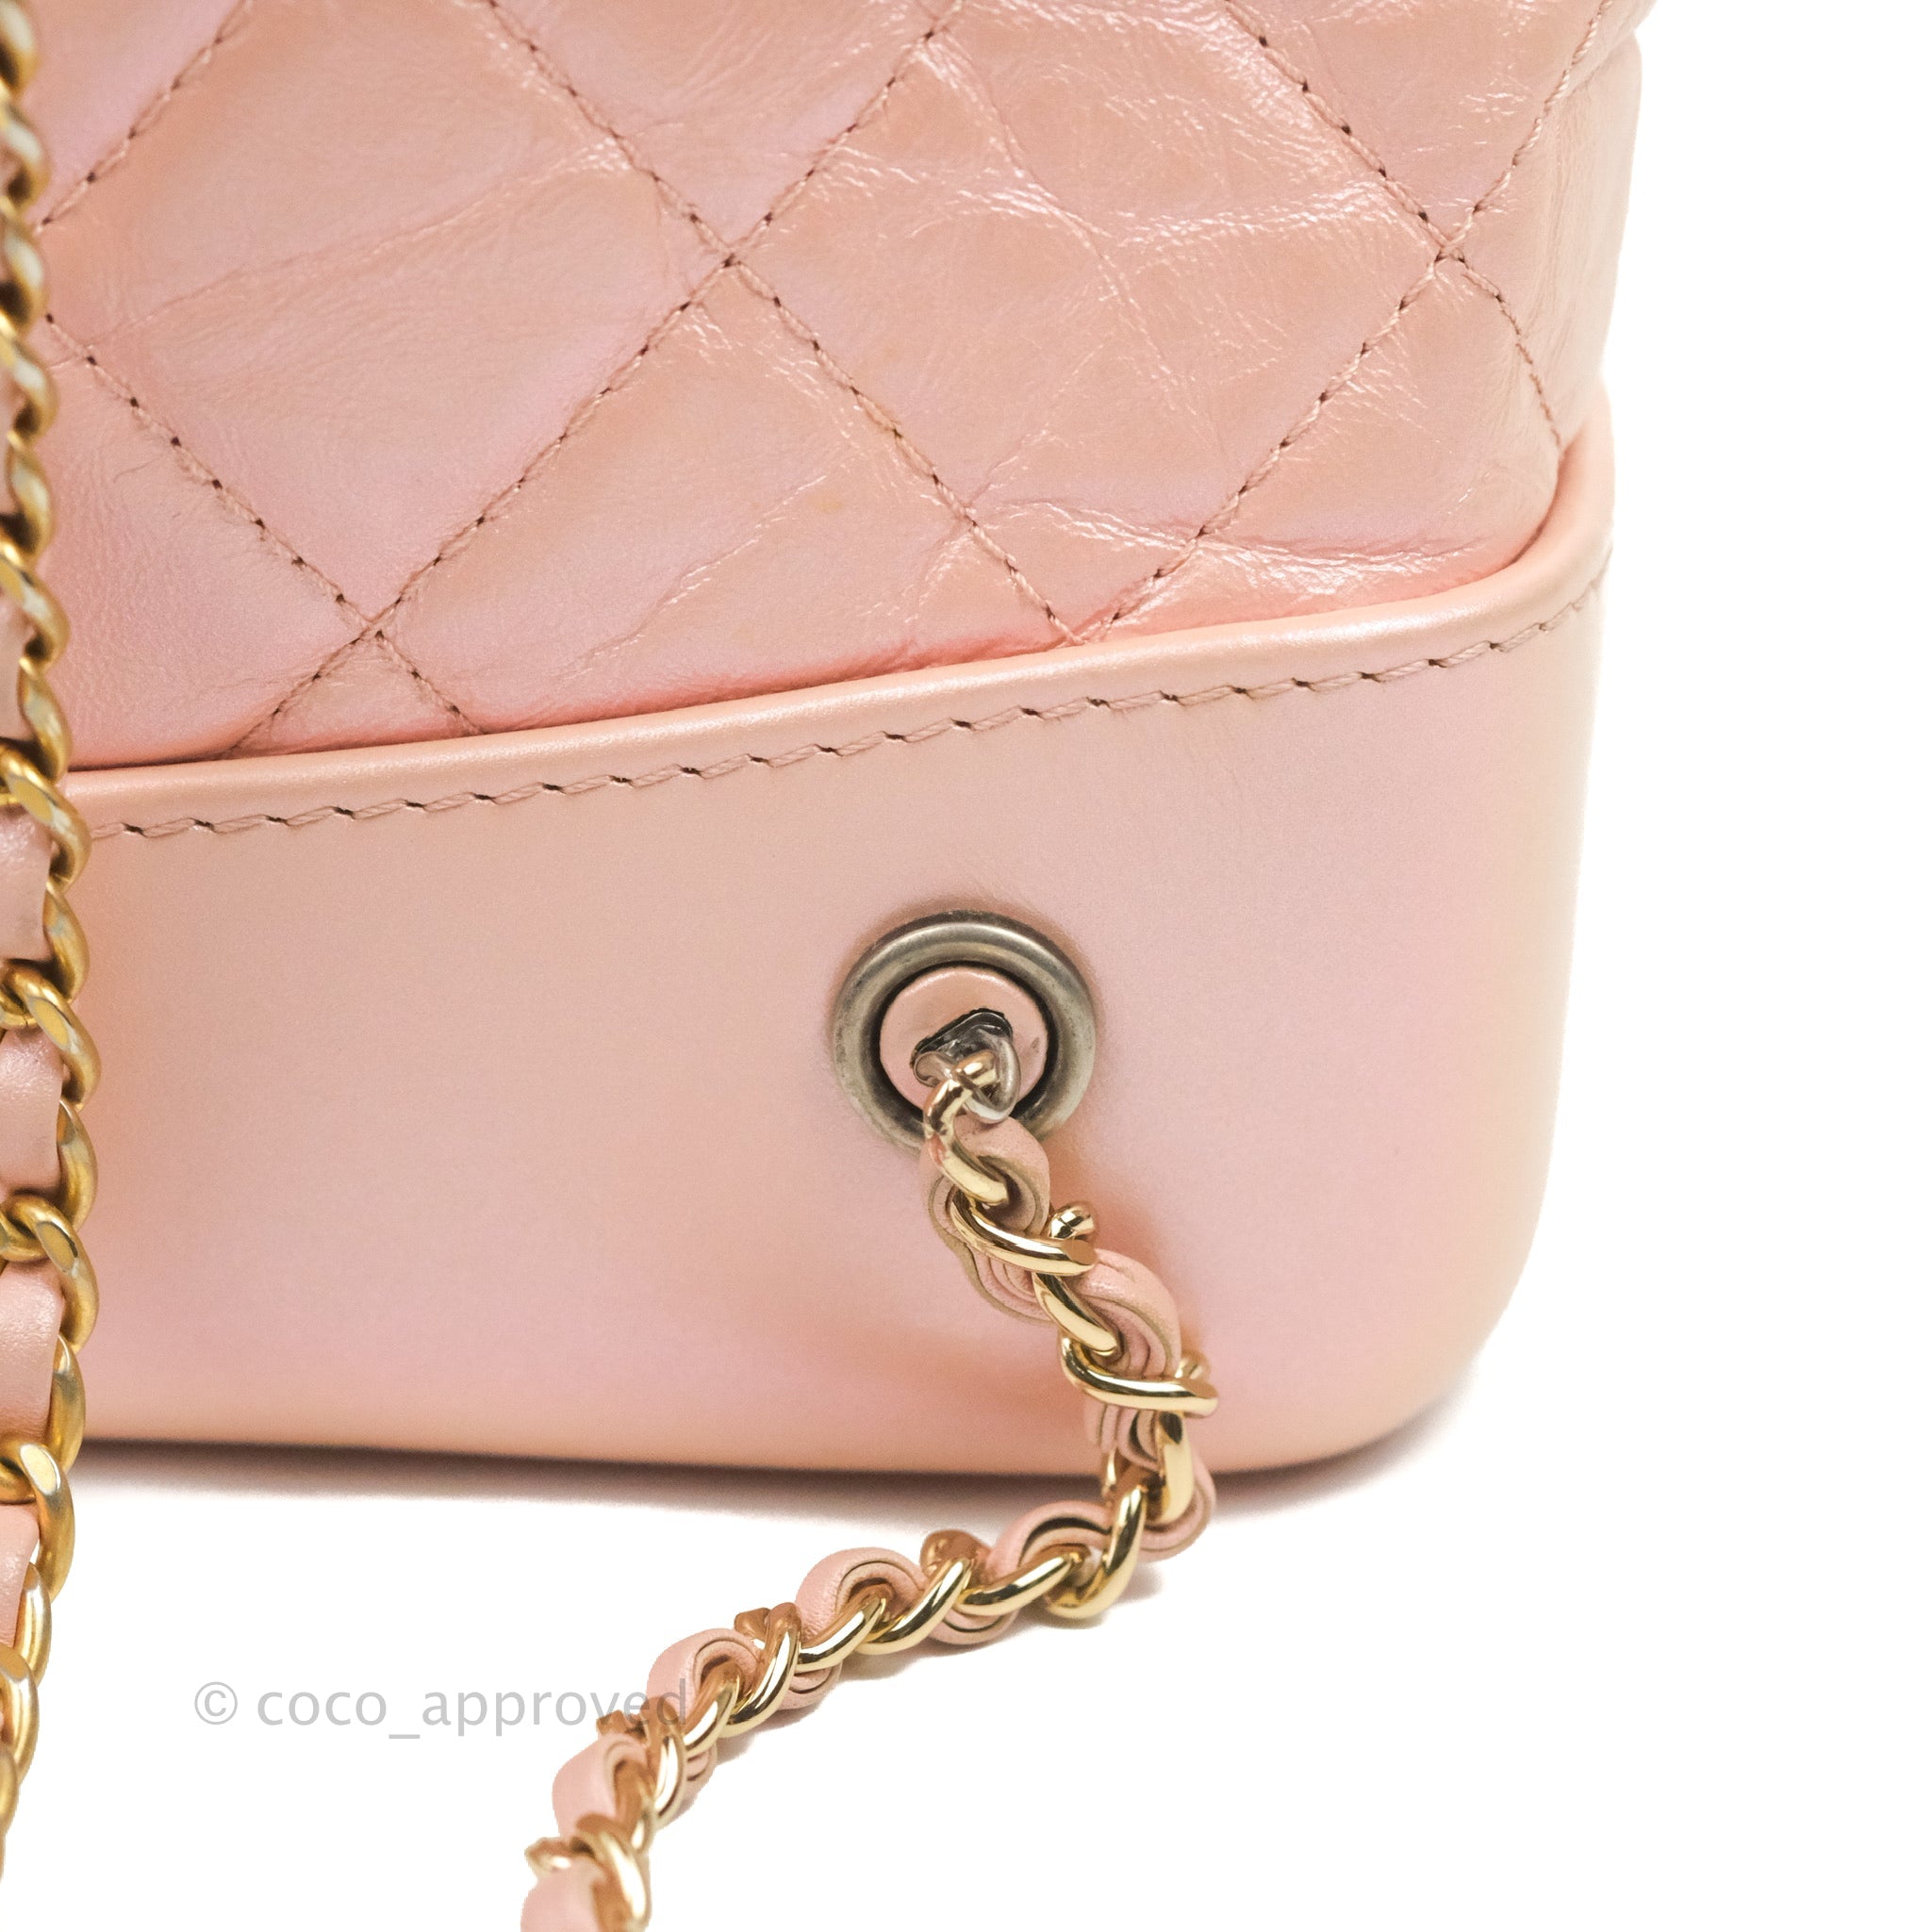 CHANEL Classic CC Baby Pink Aged Calfskin Chain Quilted Gabrielle